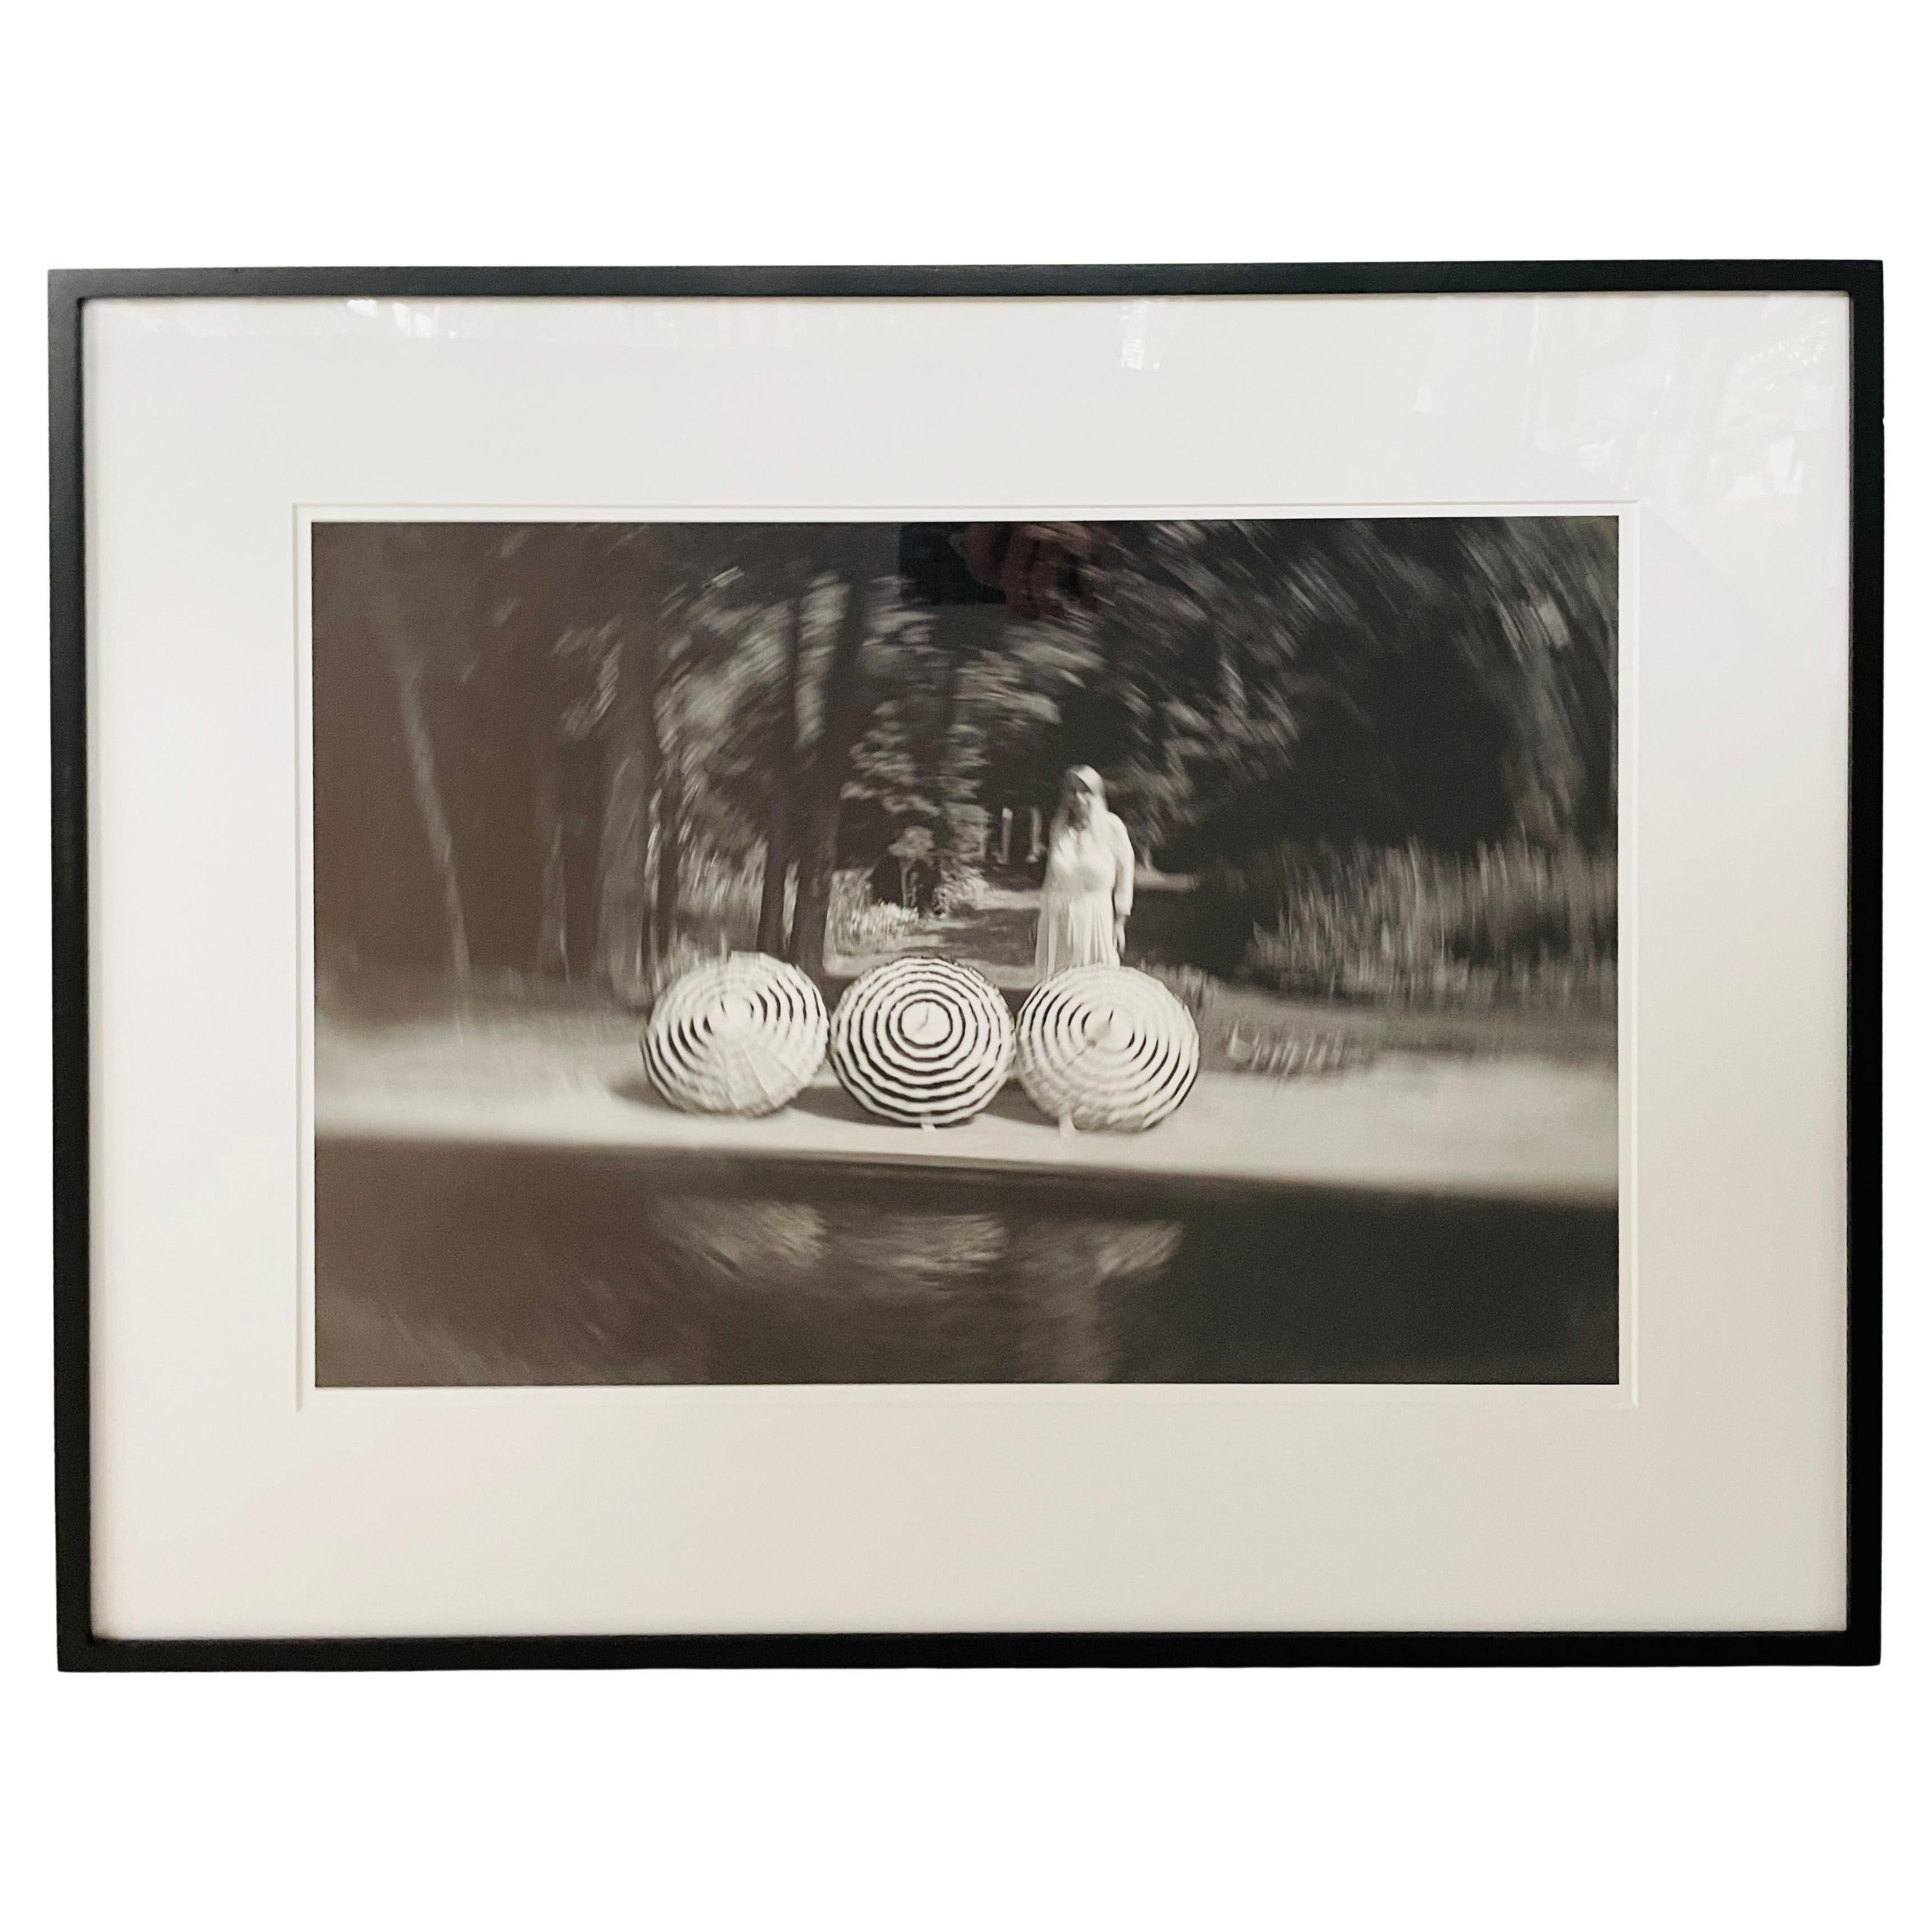 A modern genre photography archival pigment print titled " Bobbi's ghost" featuring a lady with three open umbrellas near a lake. The art work created by Luciana Pampalone ( American, 1963) is a limited edition numbered 1/20 and is part of the